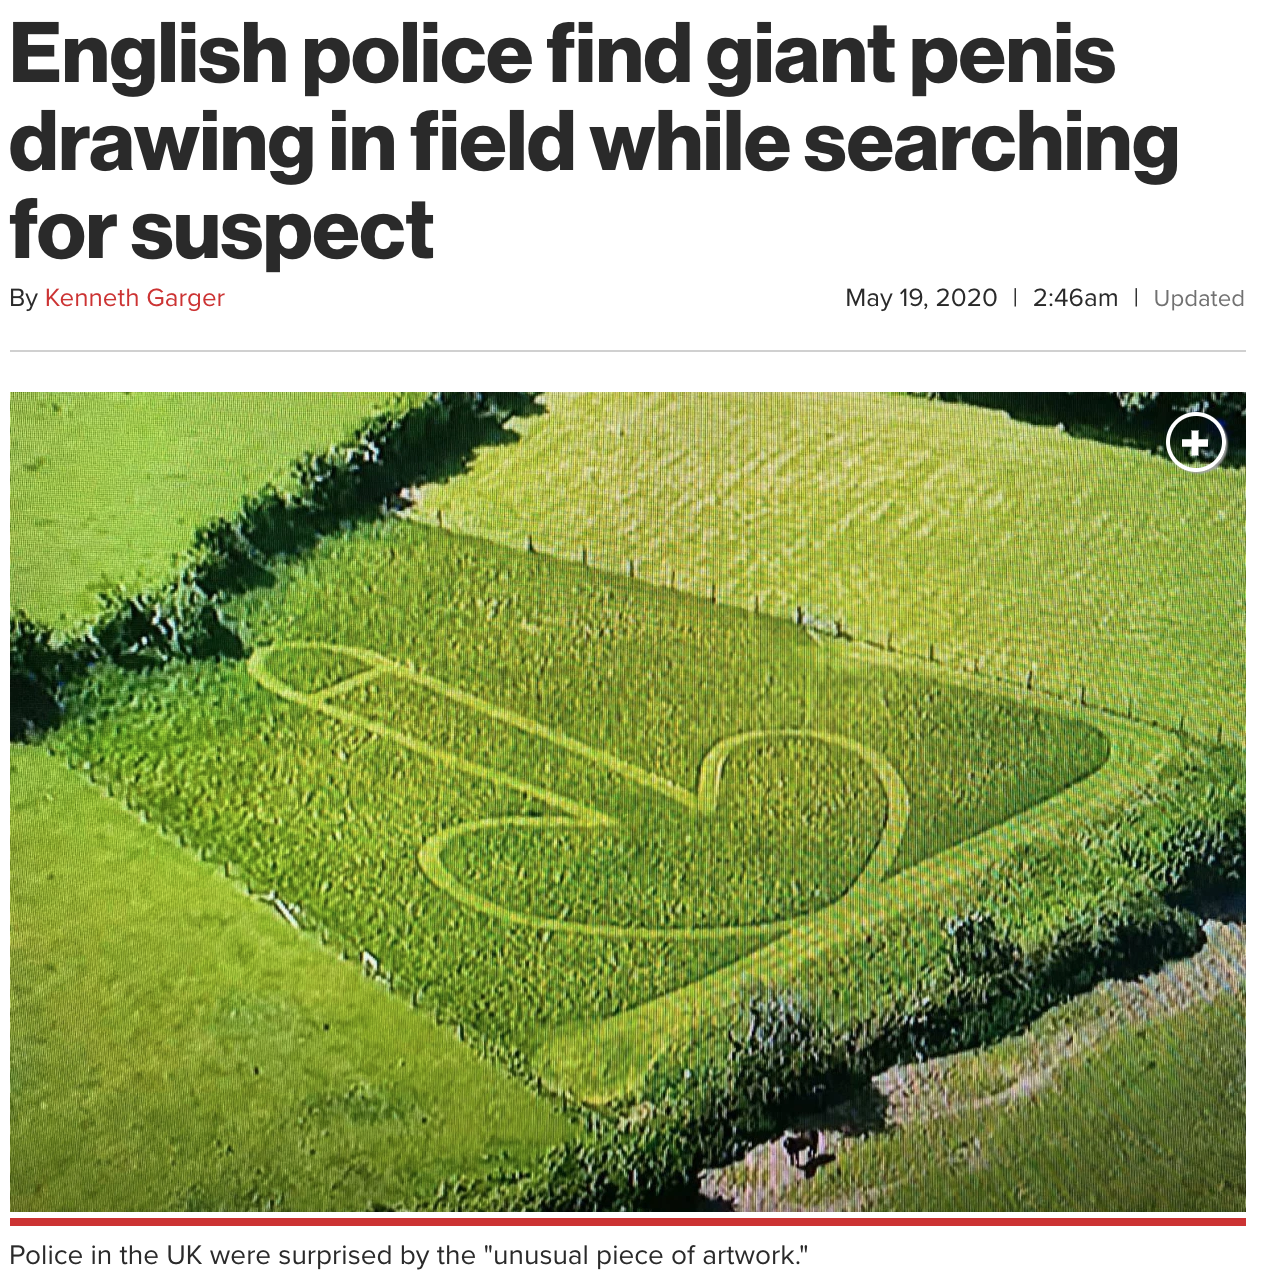 English police find giant penis drawing in field while searching for suspect - Police in the Uk were surprised by the unusual piece of artwork